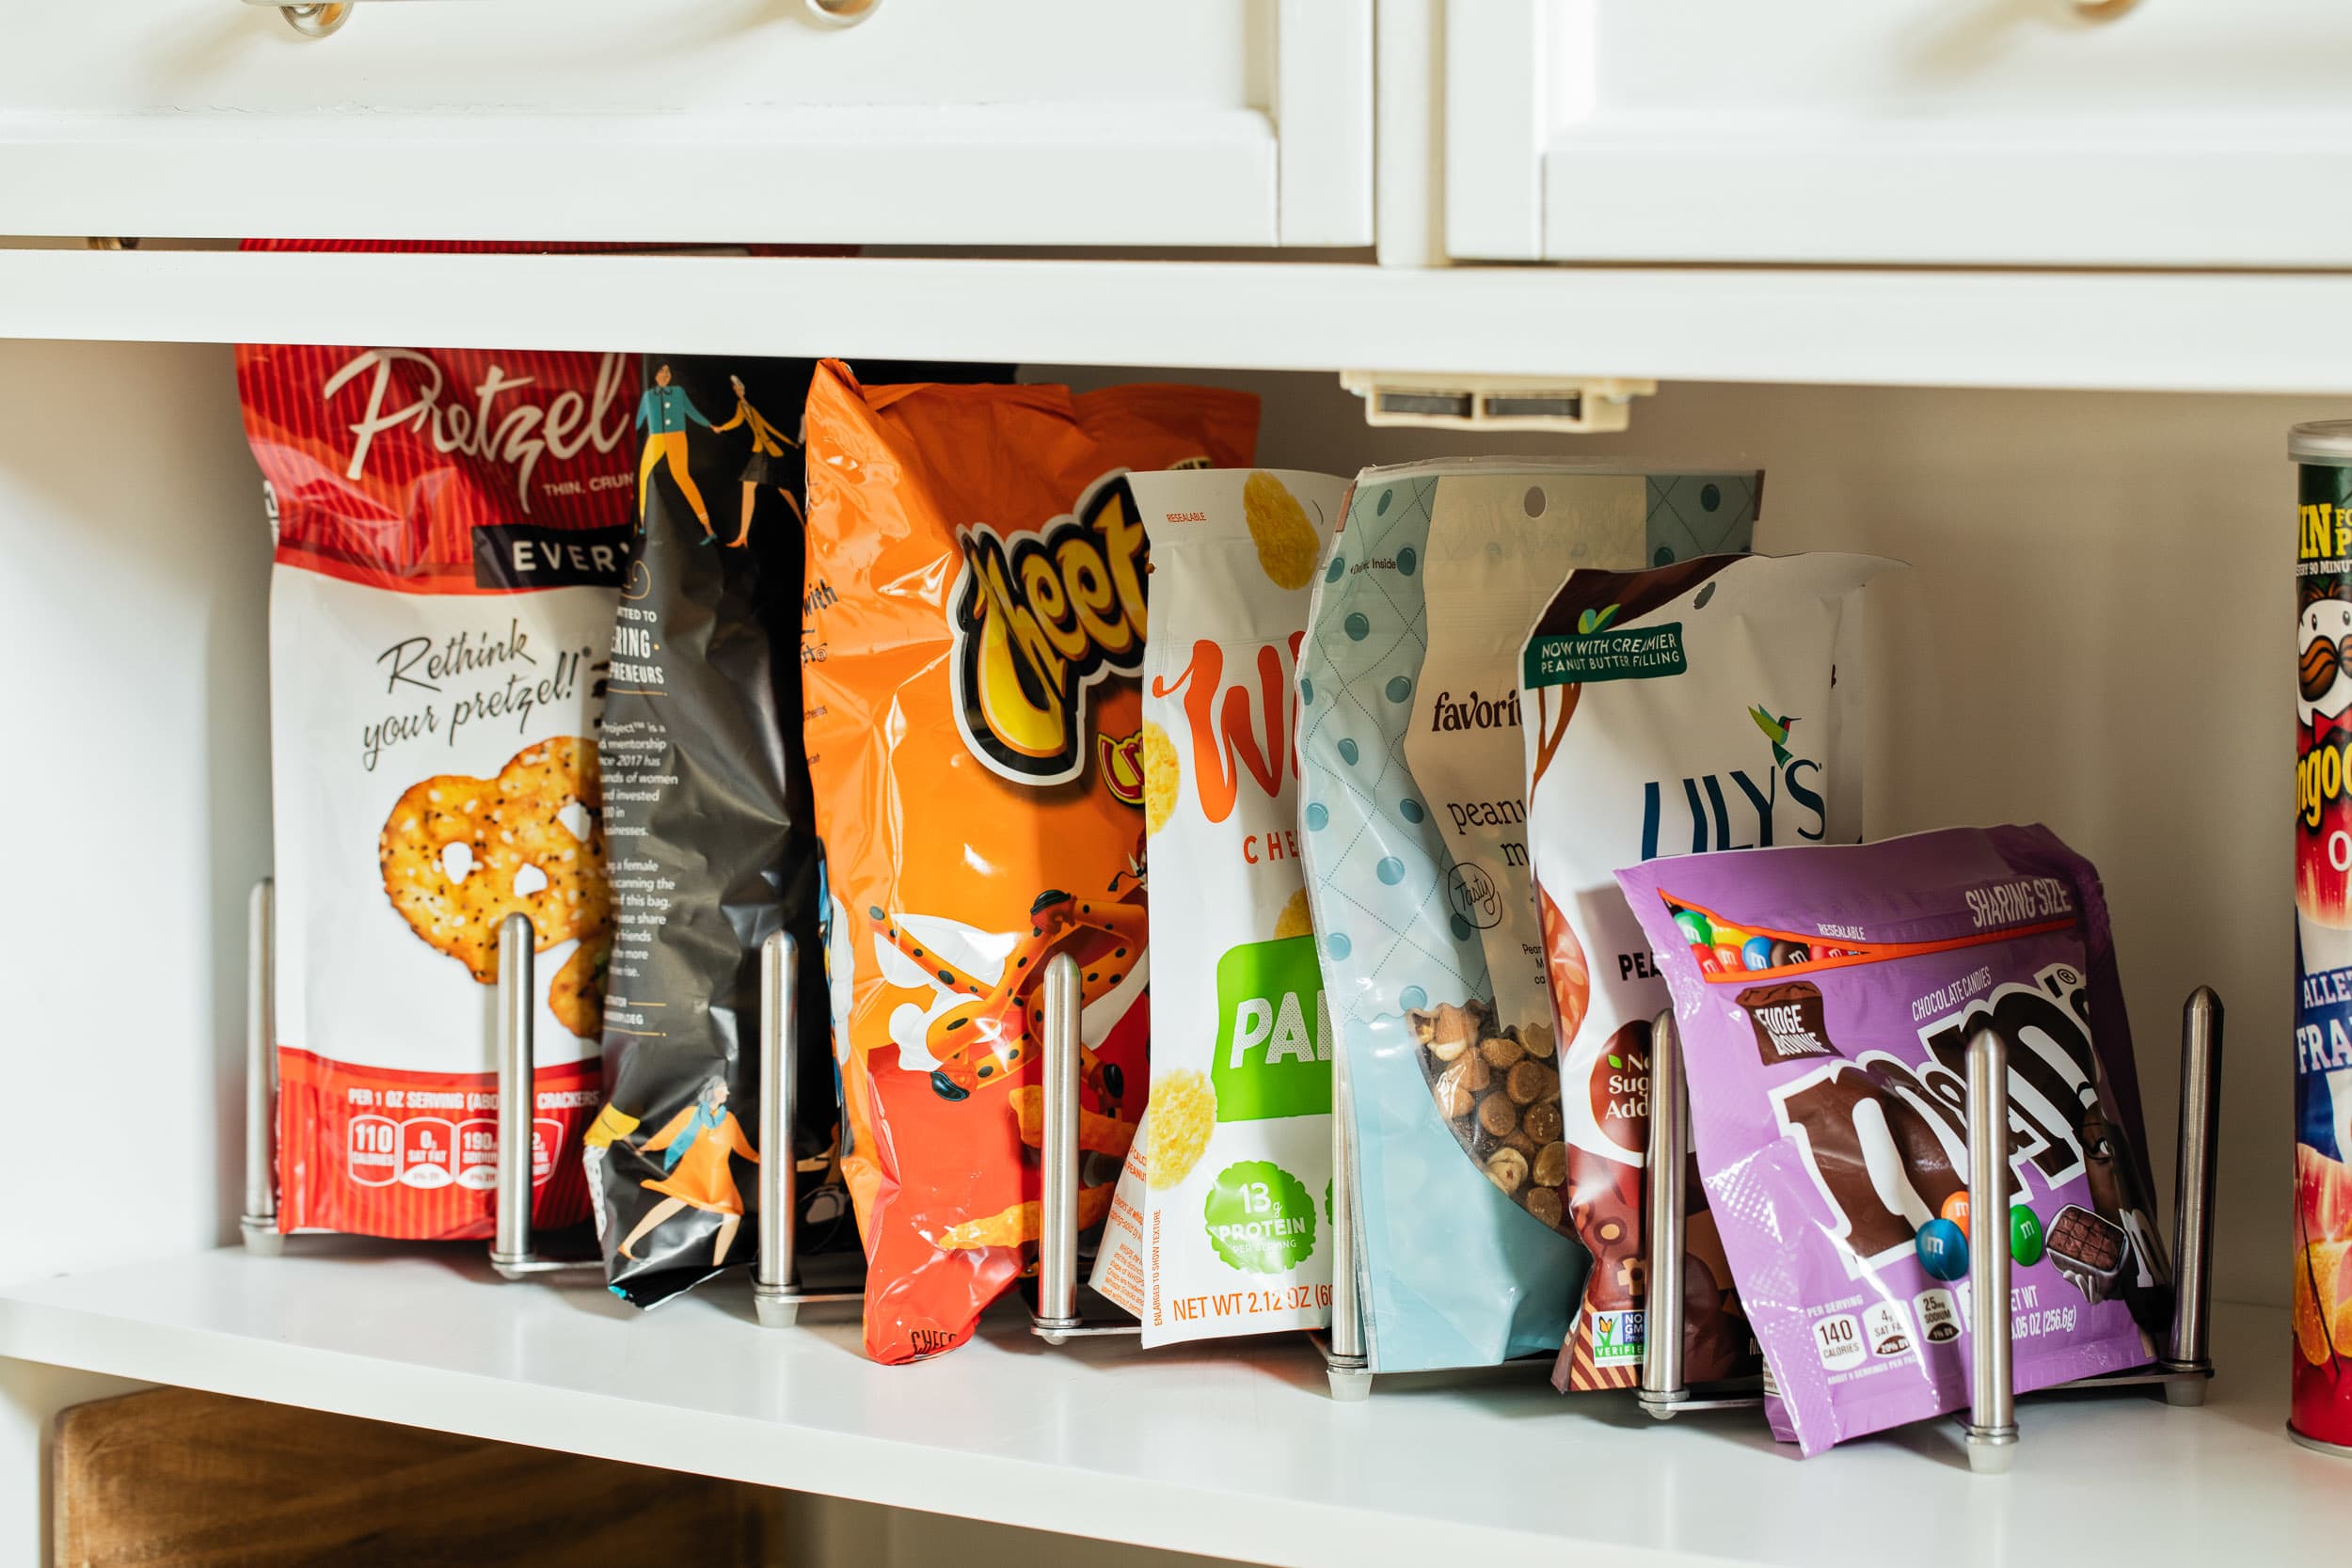 https://cdn.apartmenttherapy.info/image/upload/v1627599309/k/Photo/Lifestyle/2021-08-This-Smart-Ikea-Hack-Will-Keep-Your-Pantry-Snacks-Nice-and-Organized/Kitchn-2021-Ikea-Hack-2.jpg